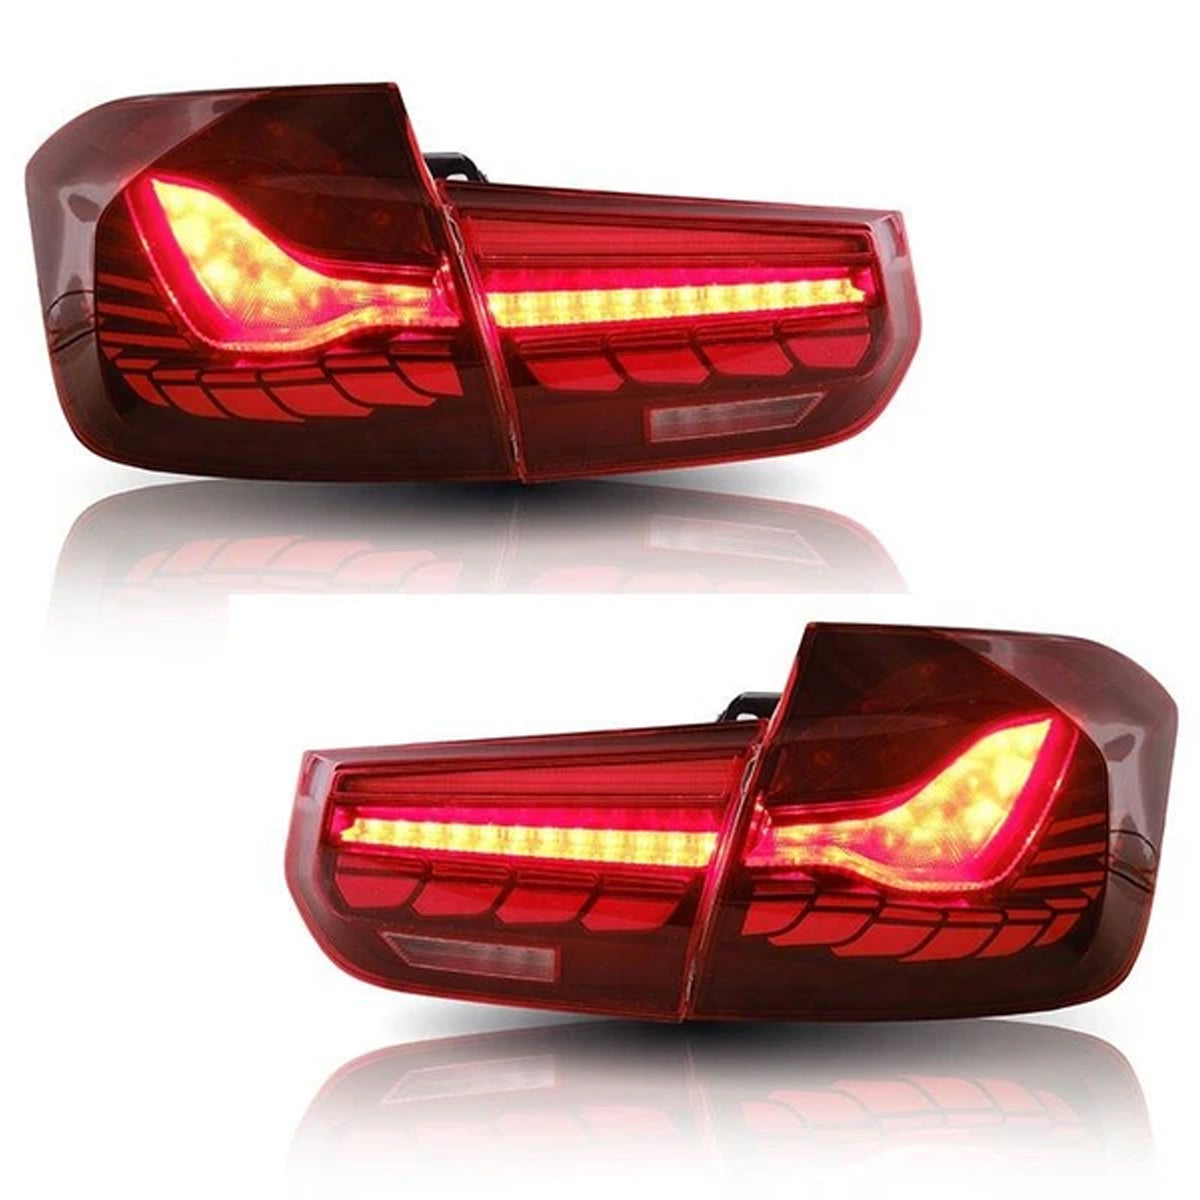 OLED GTS Style Tail Lights